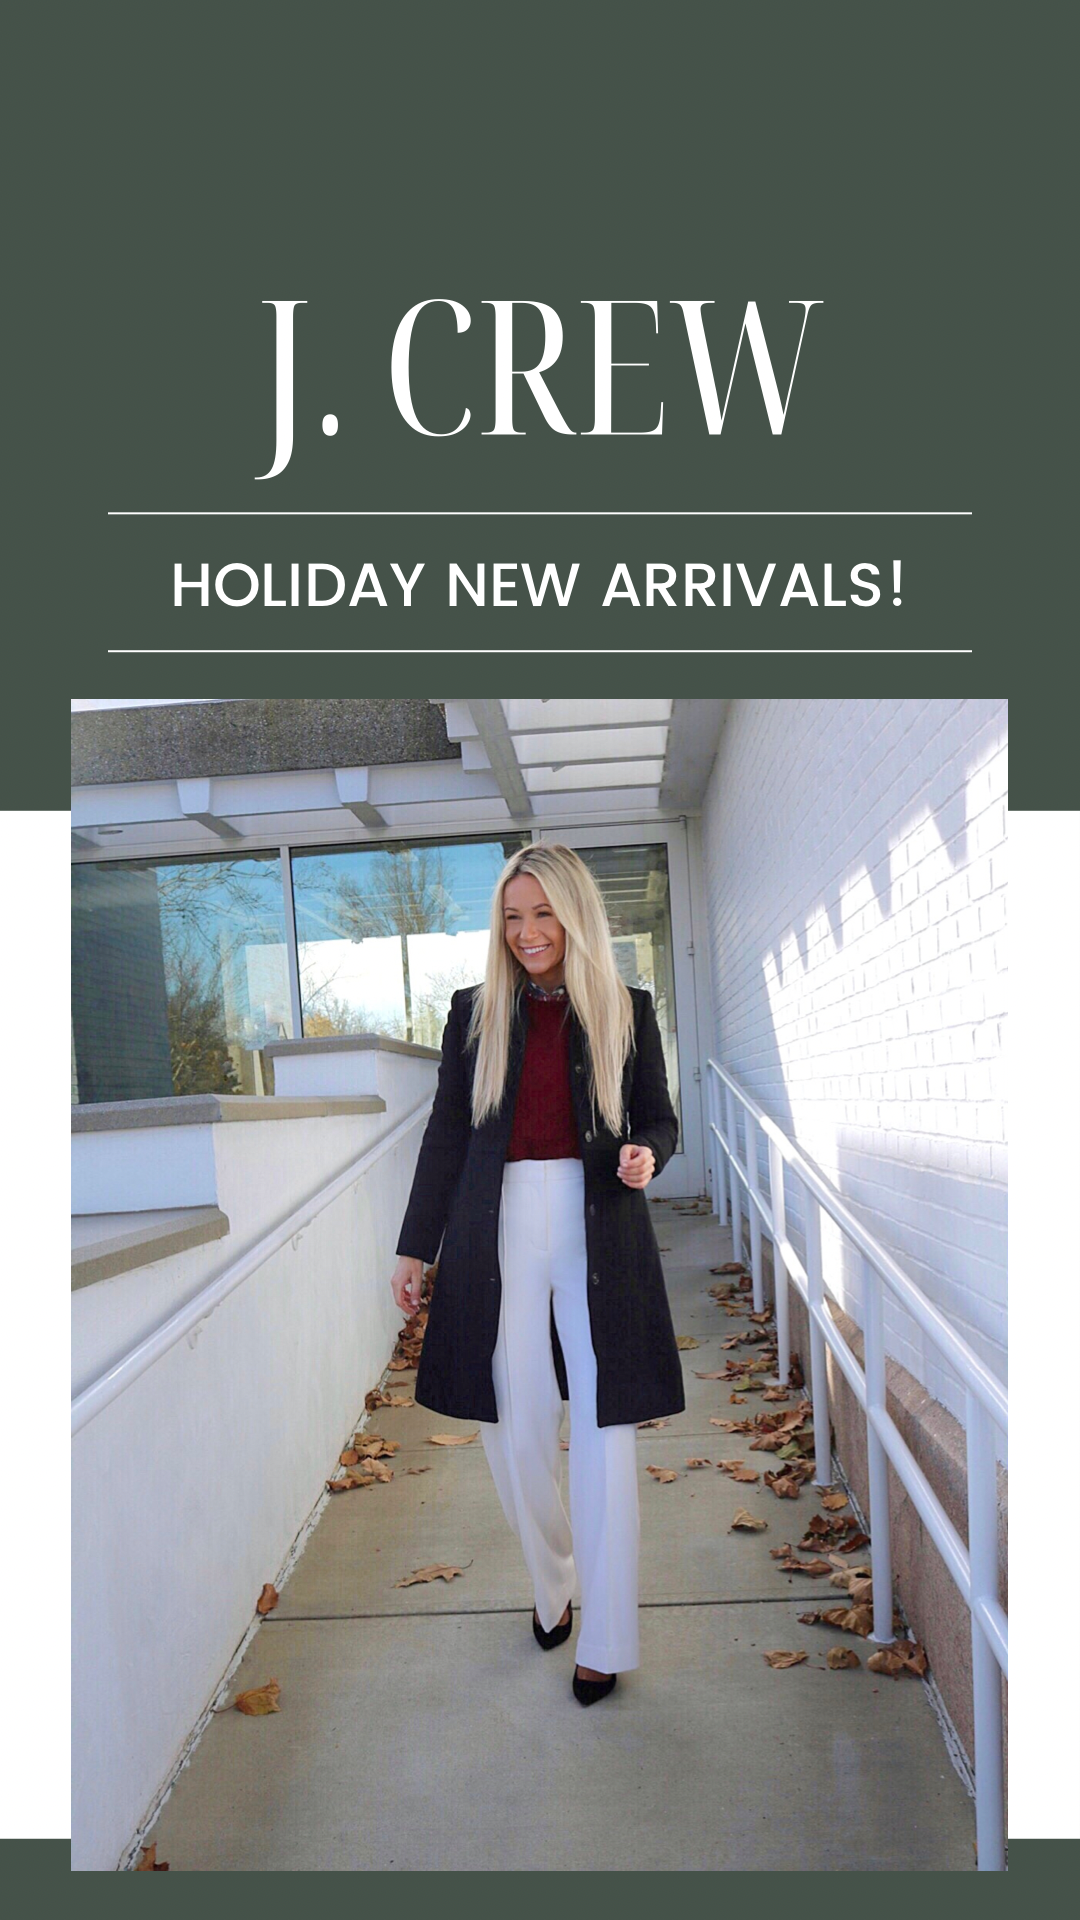 J. Crew Holiday New Arrivals